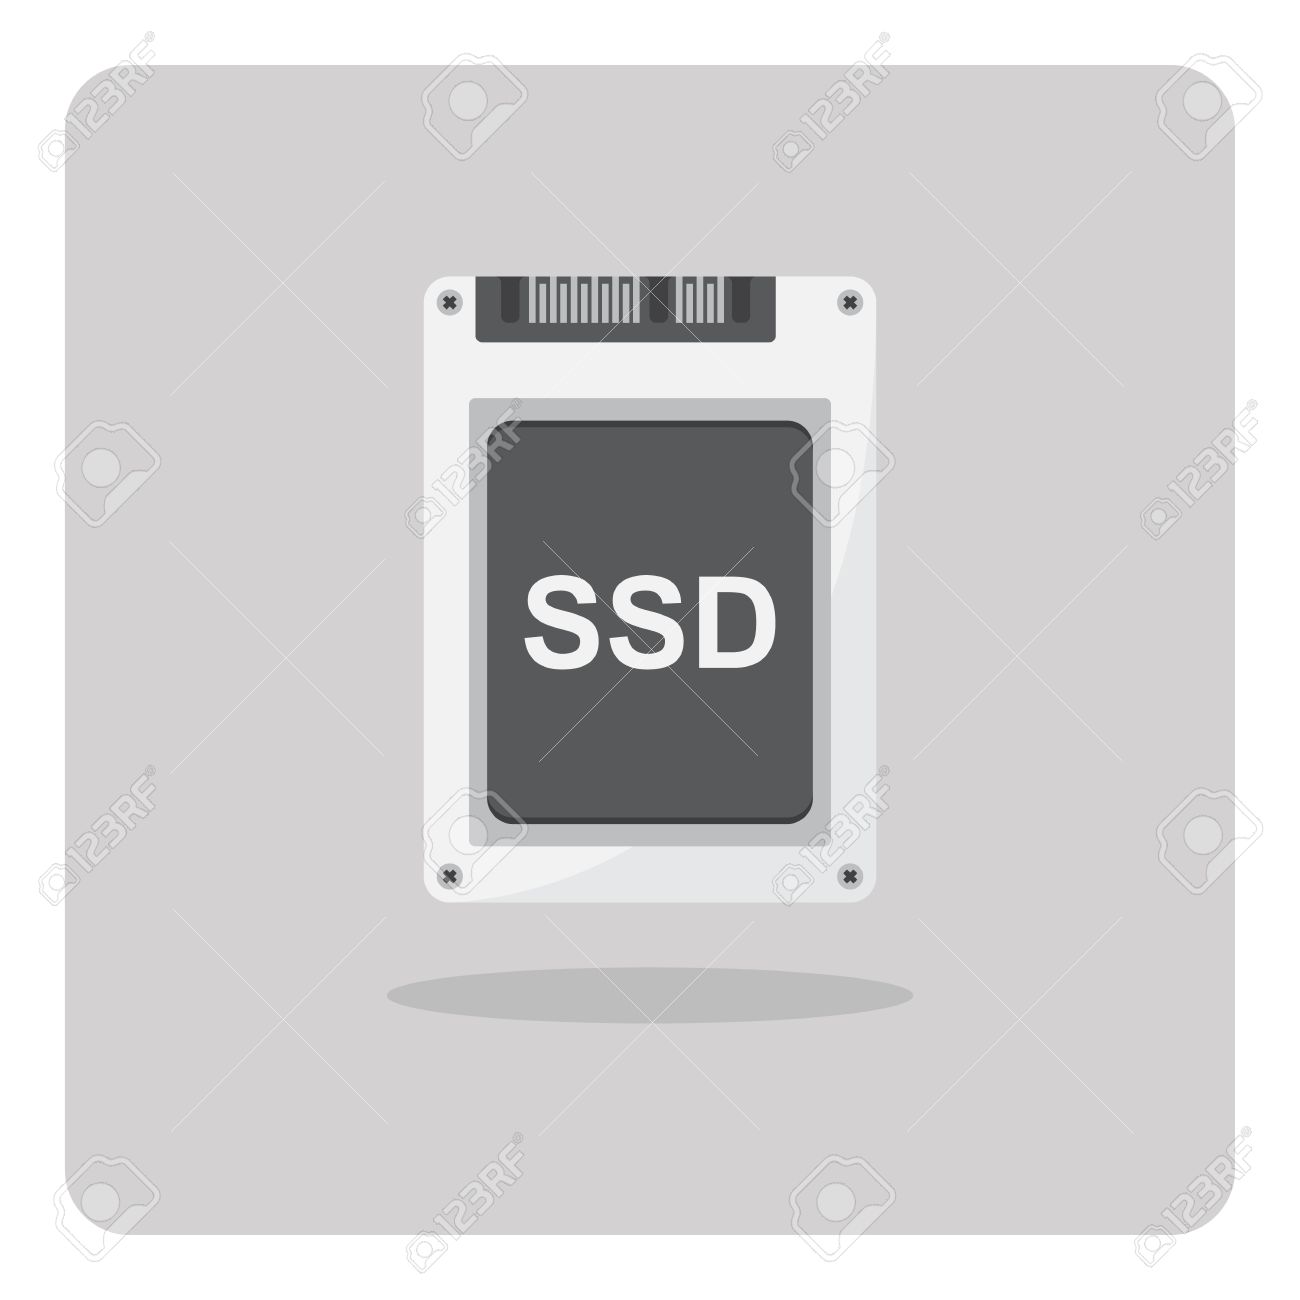 ssd card - Free computer icons